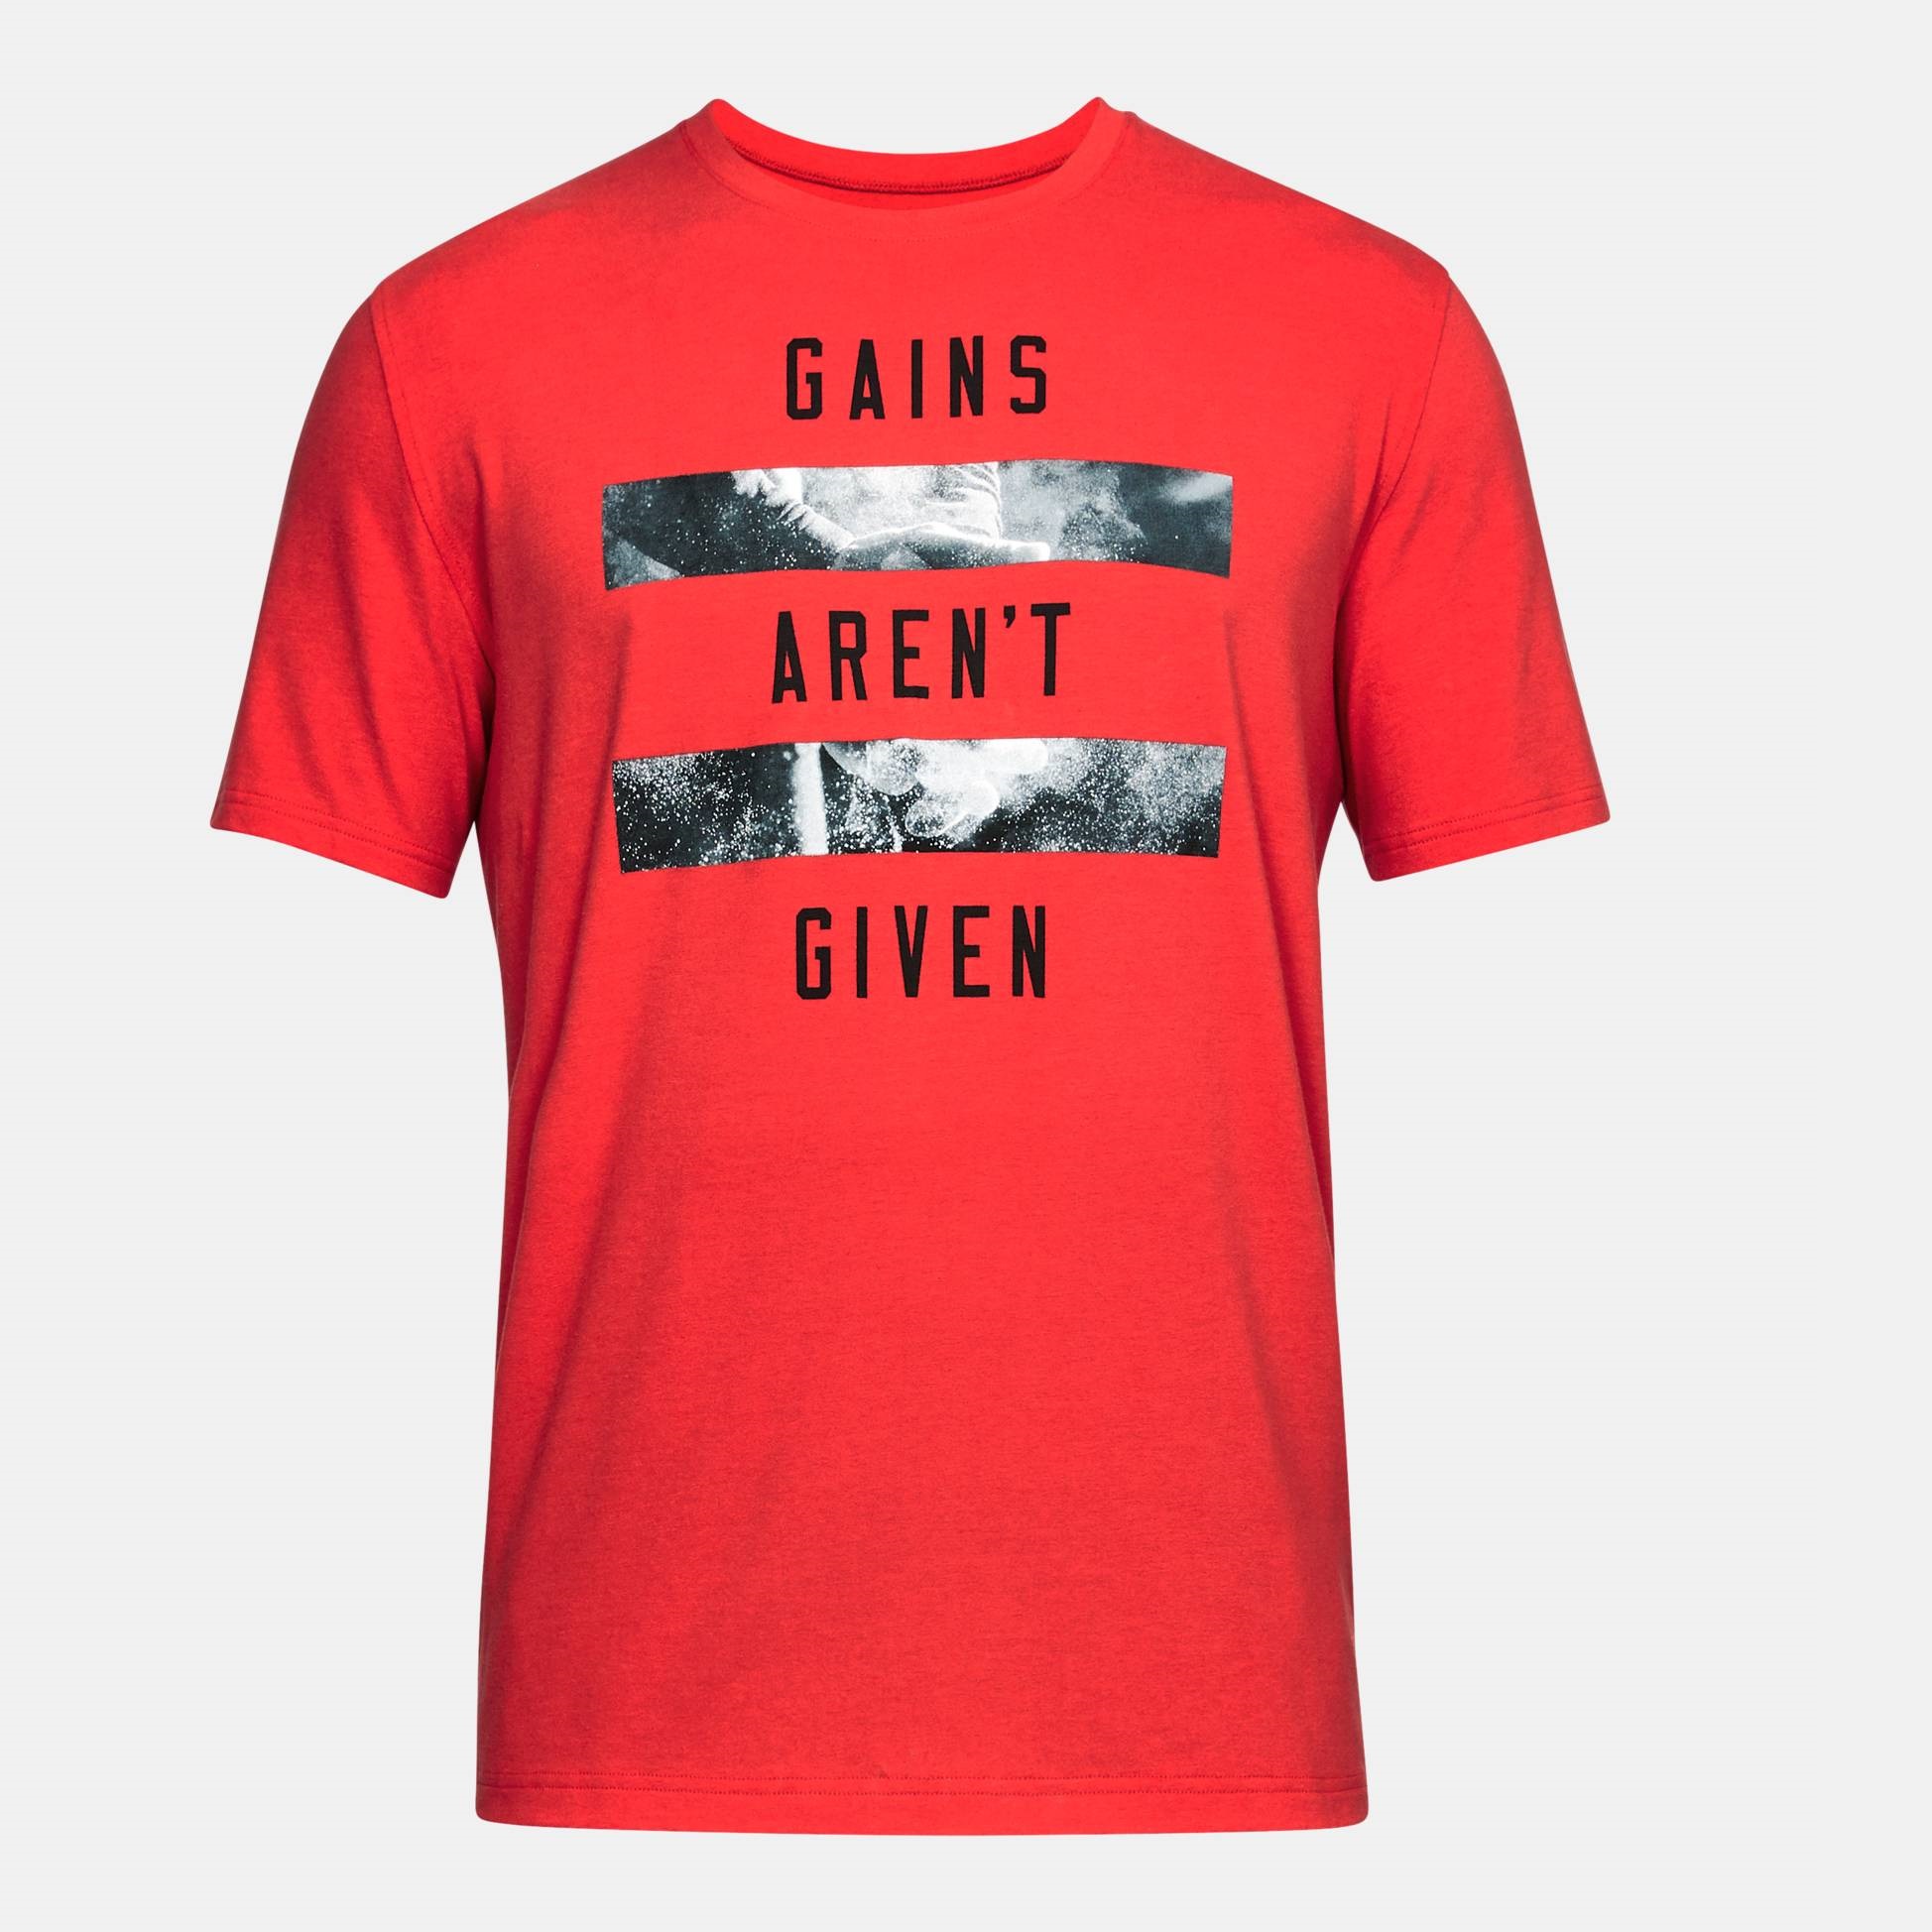  -  under armour Gains Aren t Given T-Shirt